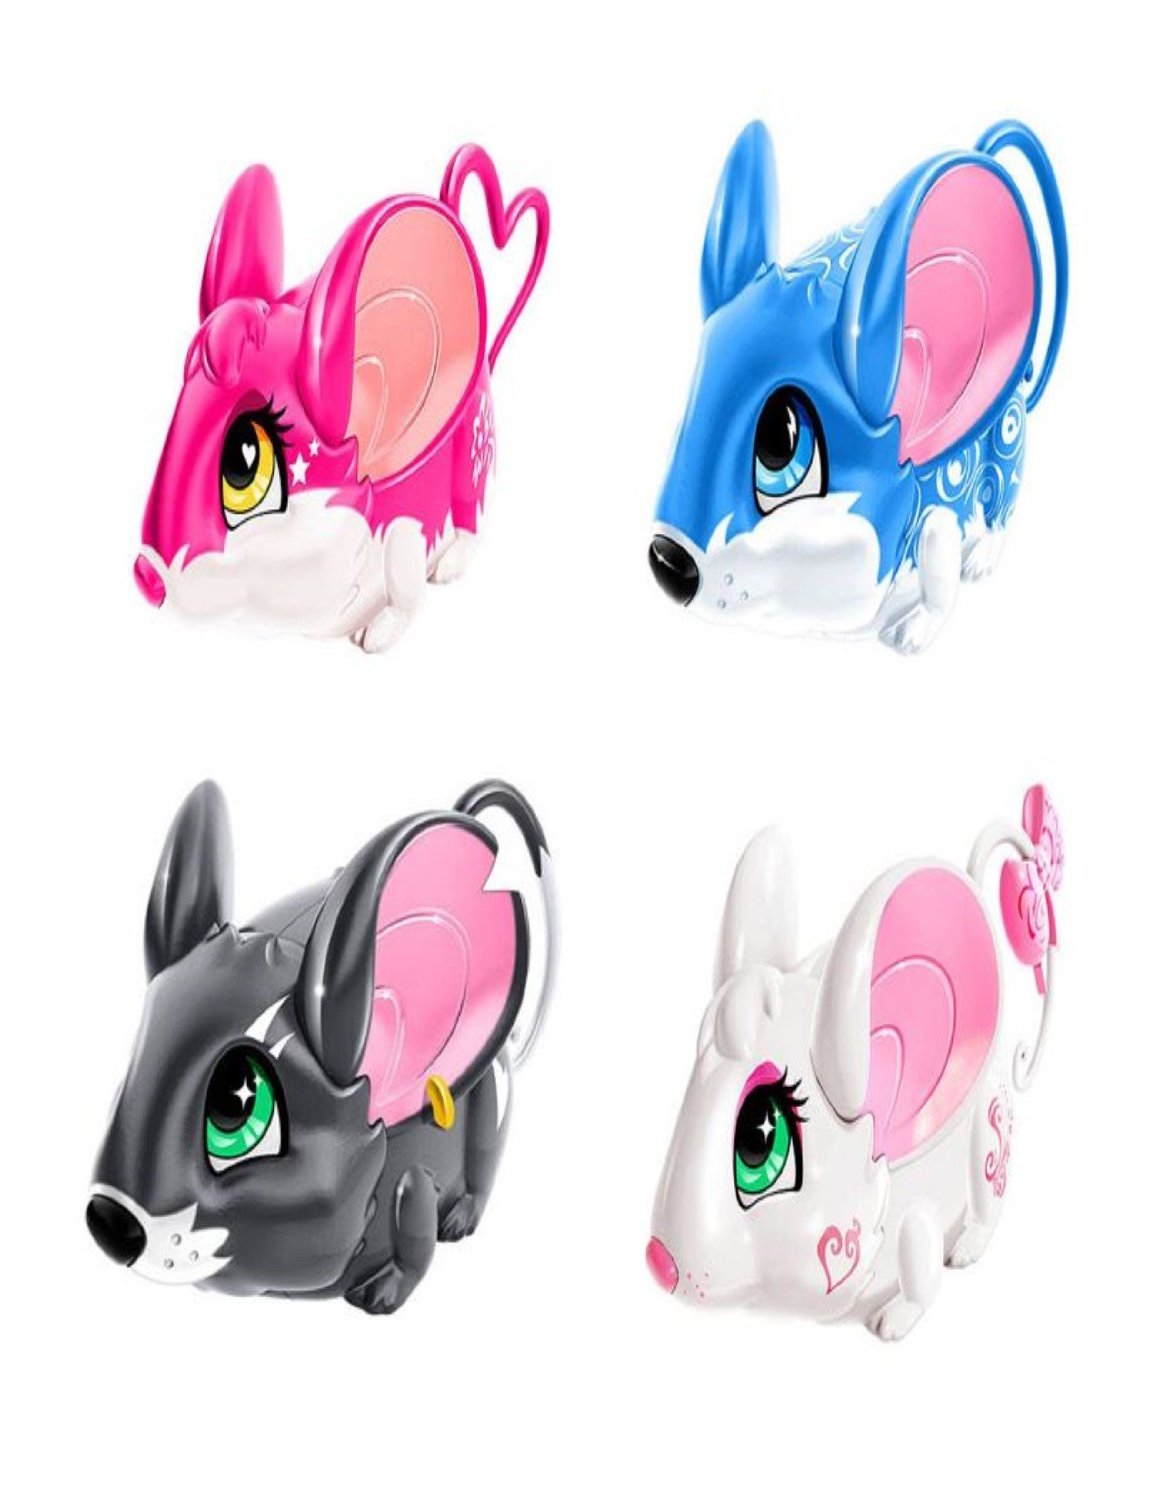 The Amazing ZHUS Pets, Stunt Pet Set of 4 Include Dynamo, Kardini, Abra, and Piccadilly Interactive Pets